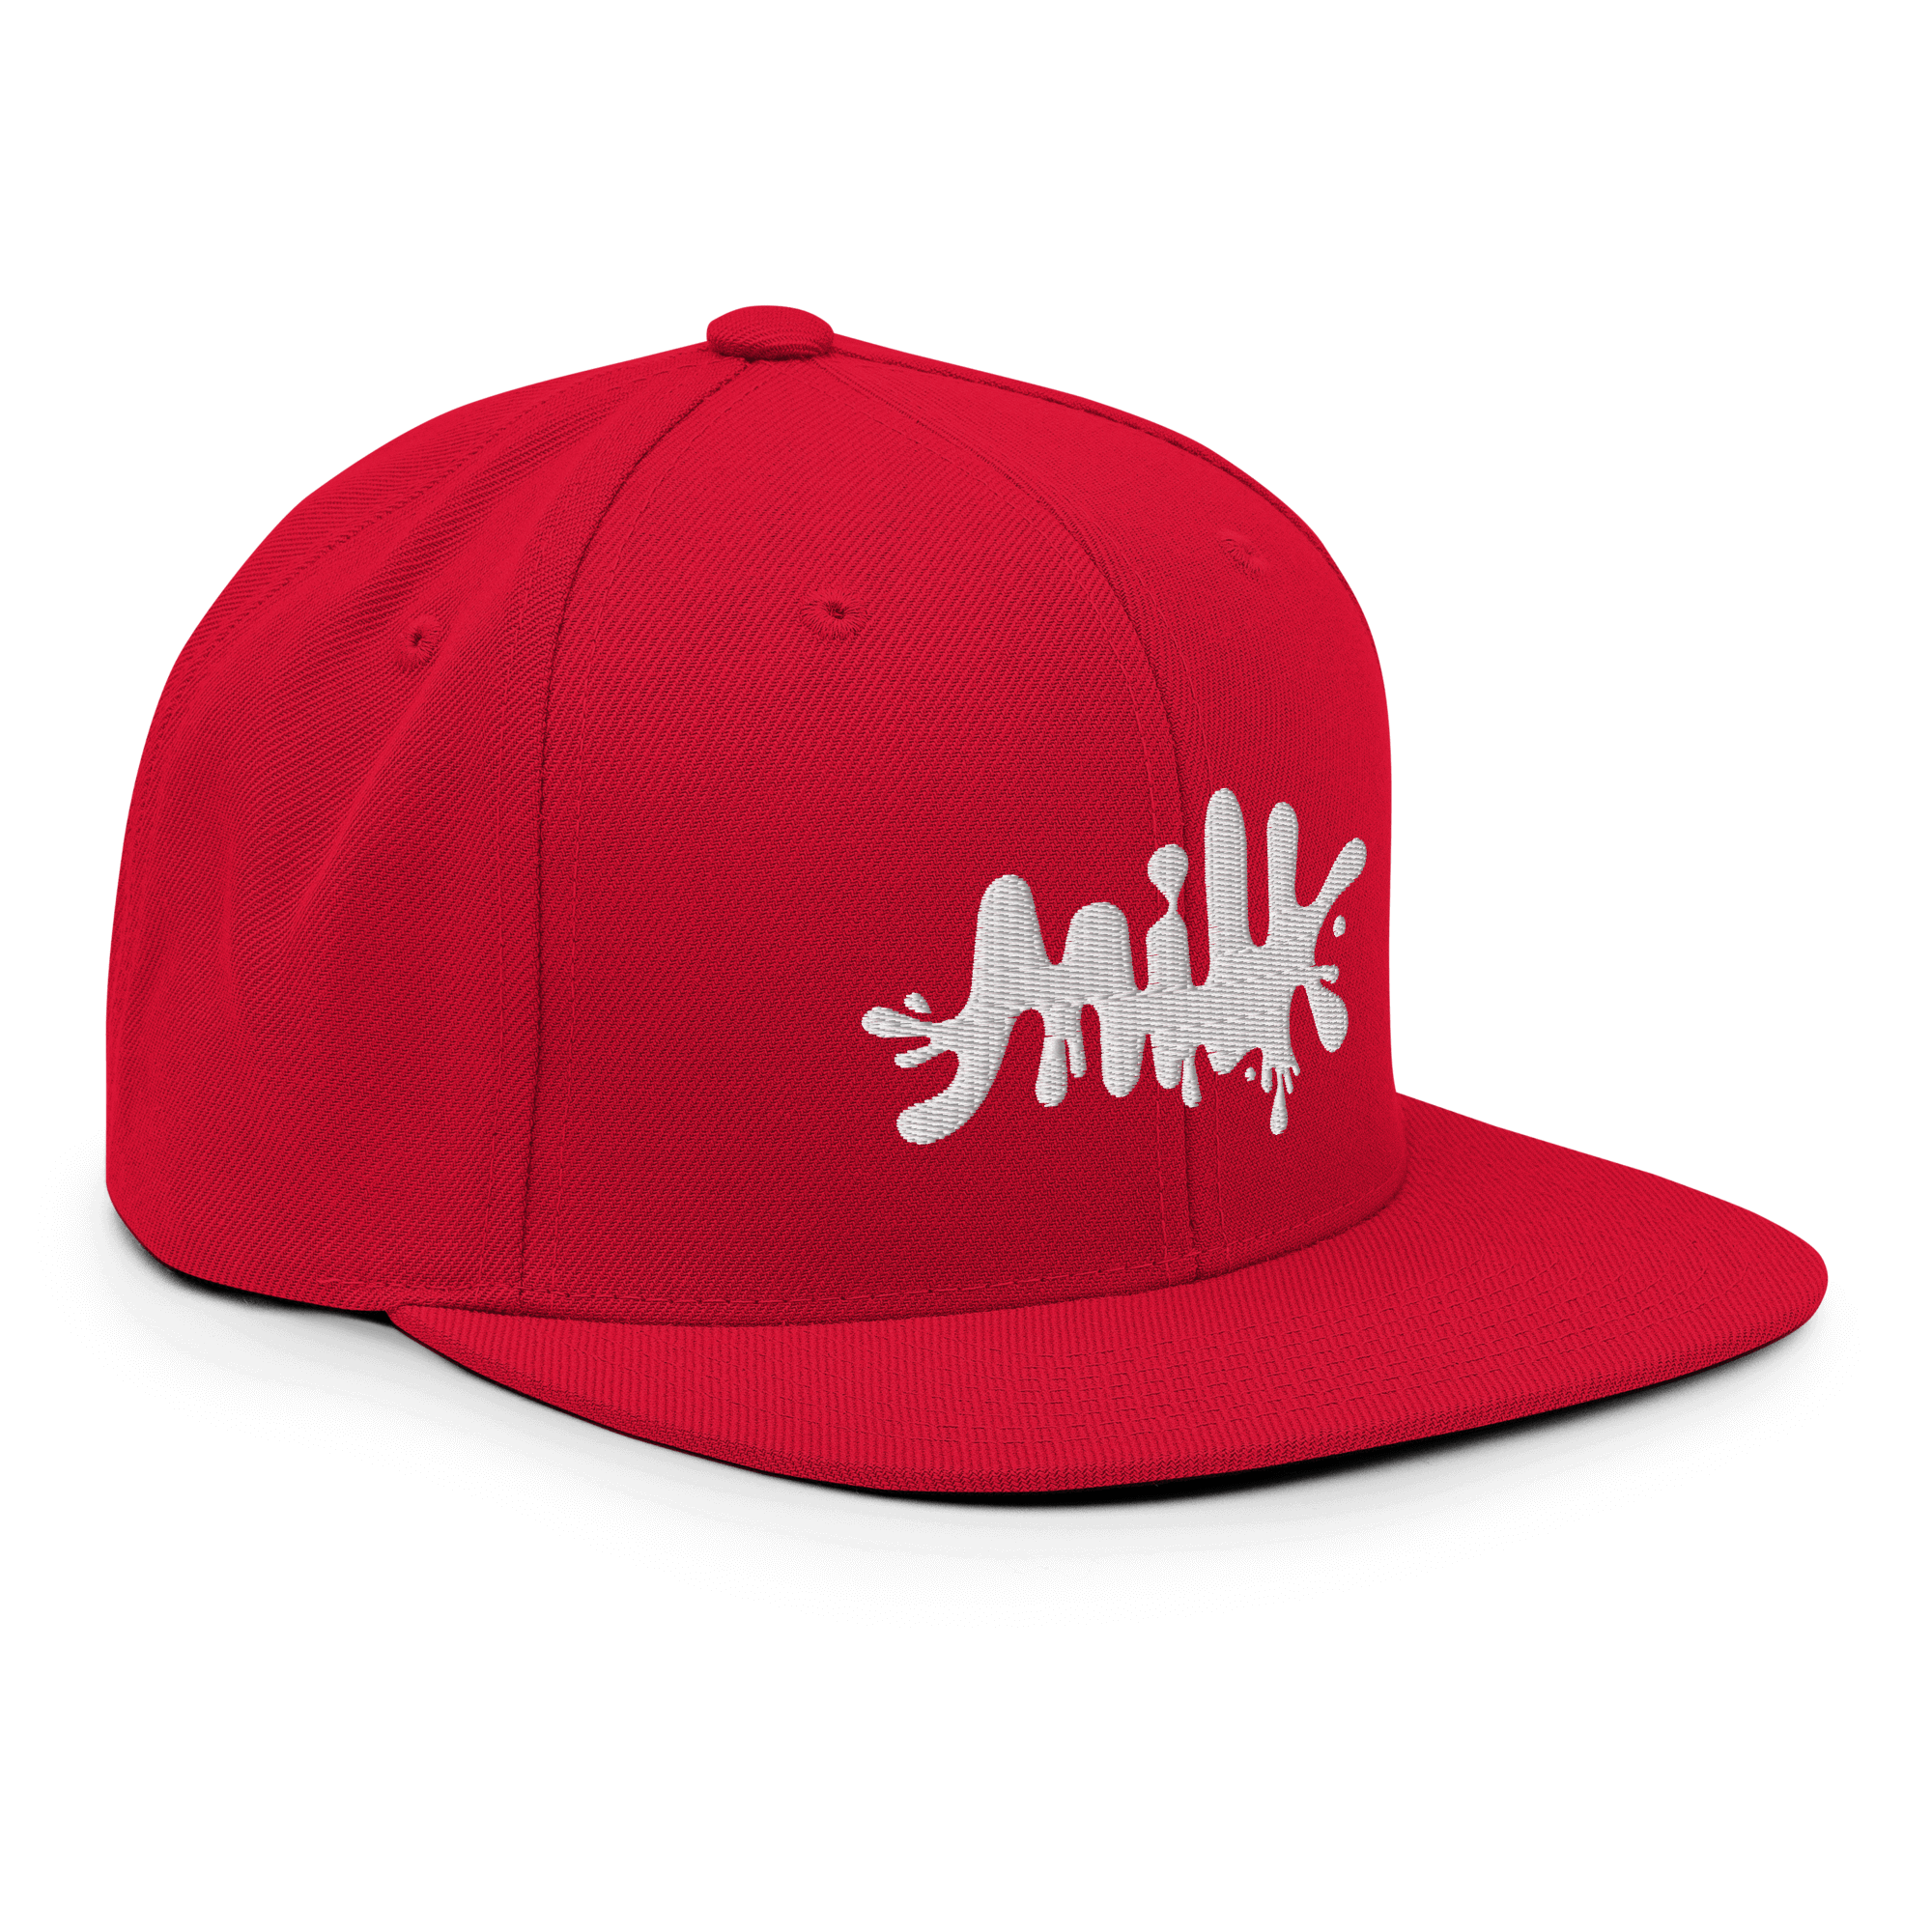 Milk Snapback CapIntroducing the Milk Snapback Cap – a structured classic with a flat brim and full buckram, embodying timeless style. The adjustable snap closure ensures a comfortable, one-size-fits-most fit. Crafted just for you upon order, our on-deman